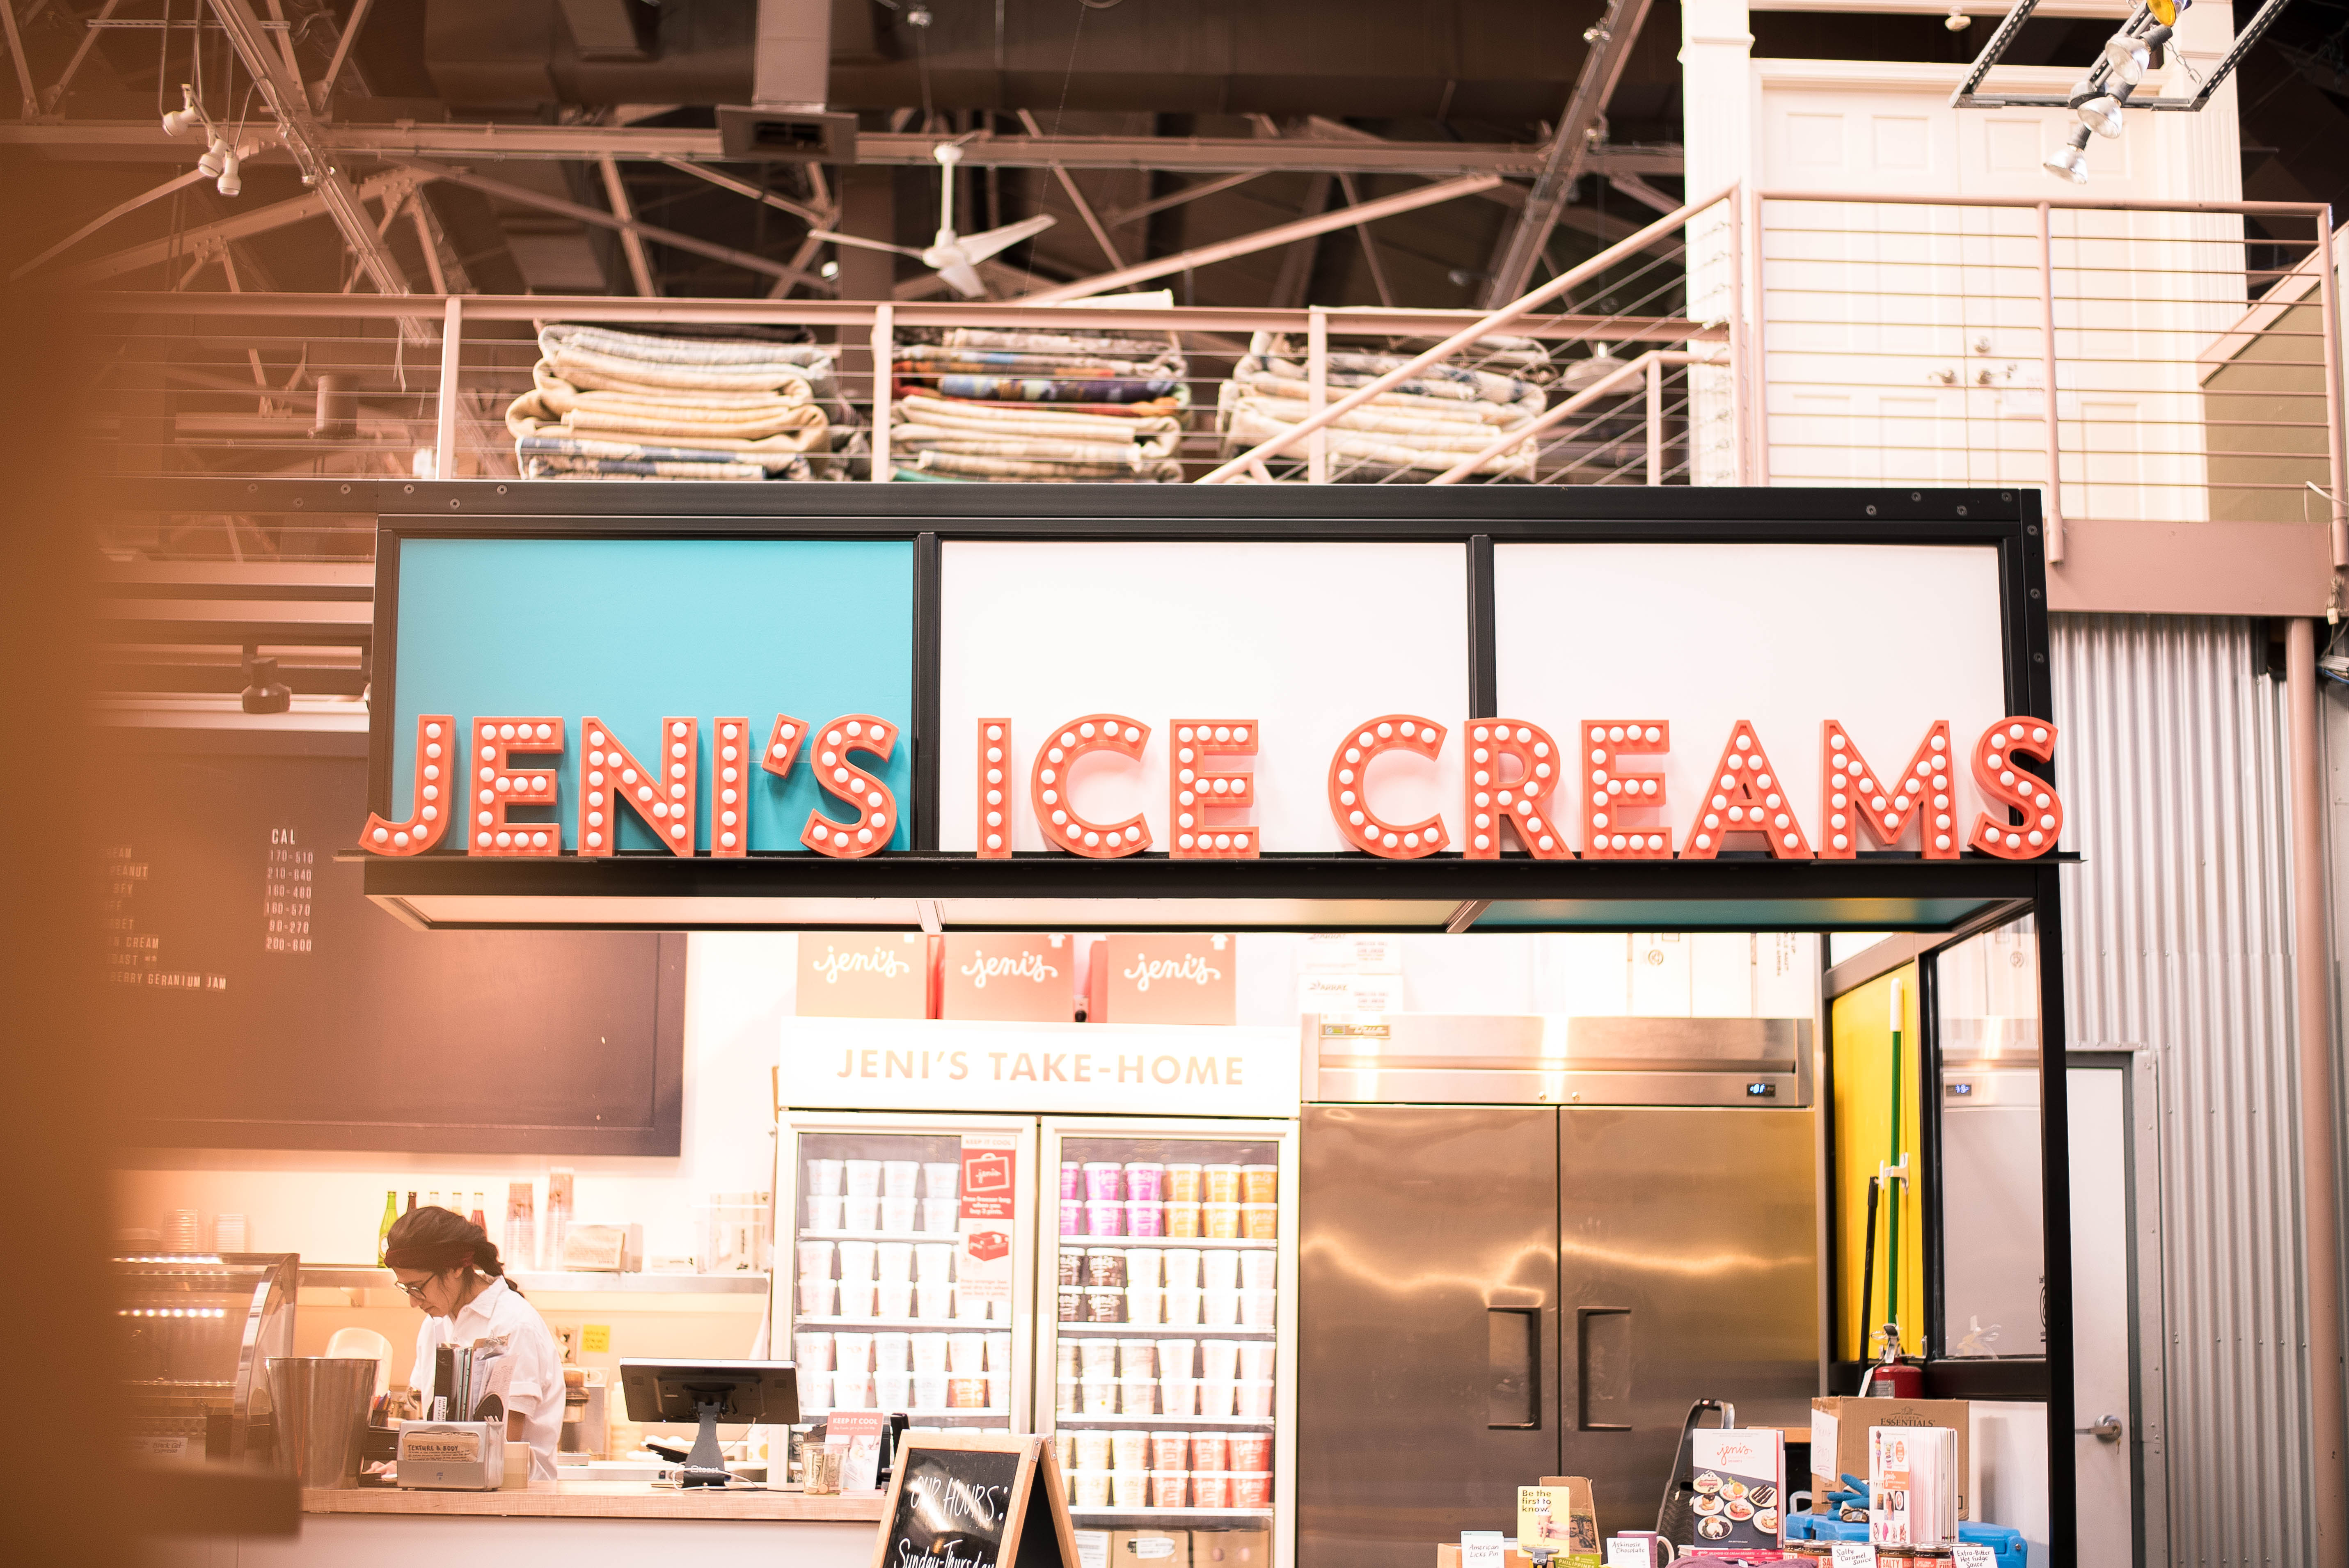 Jenis Ice Cream, Factory at Franklin